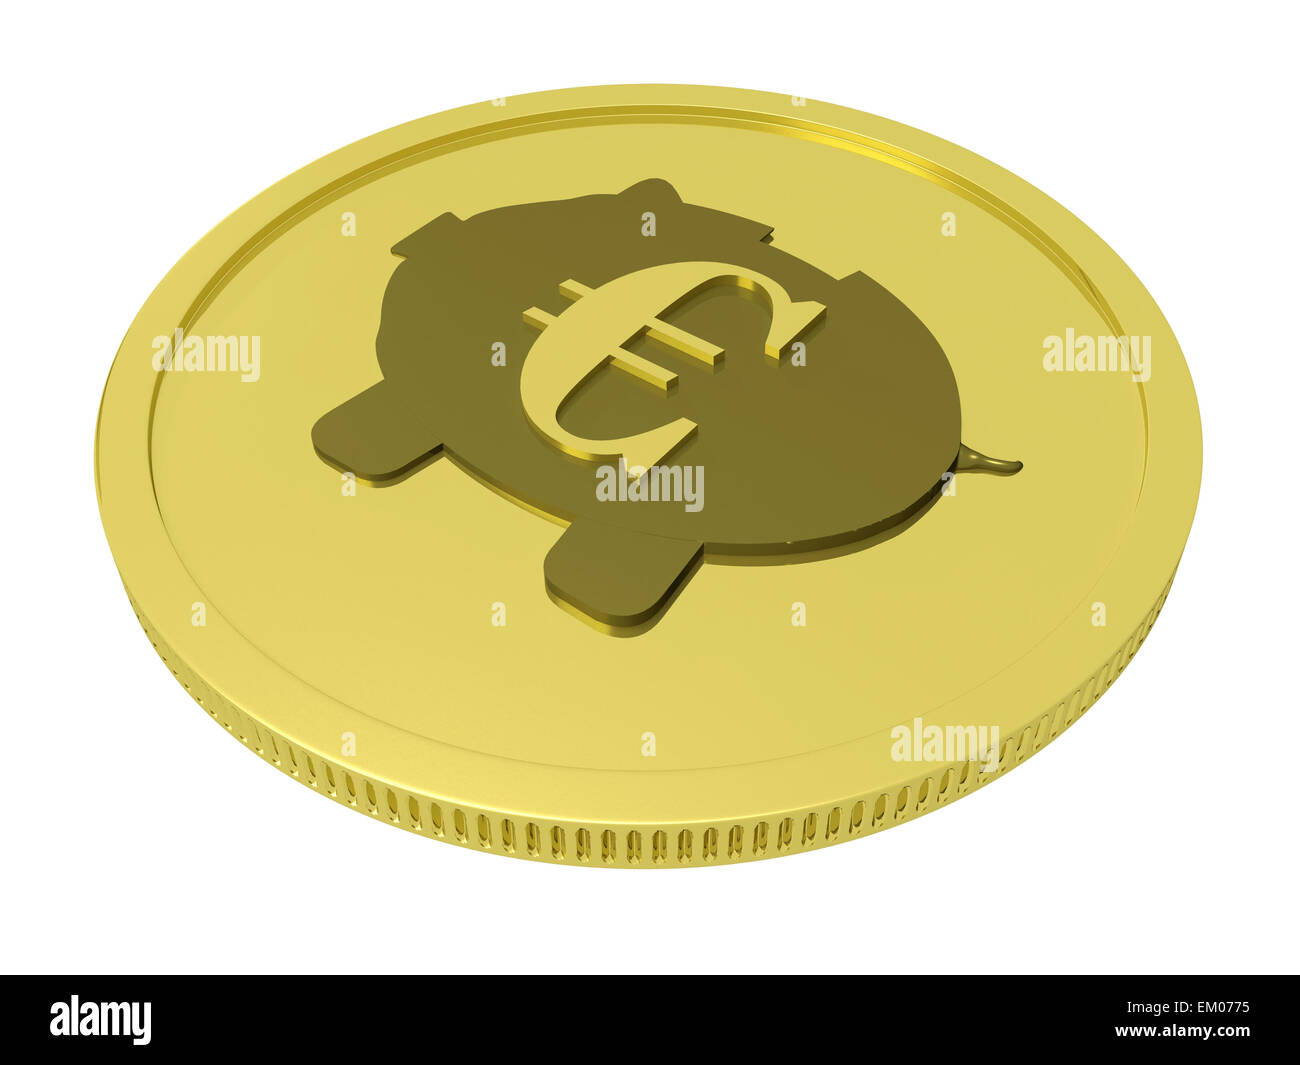 Euro Piggy Coin Showing European Currency Stock Photo